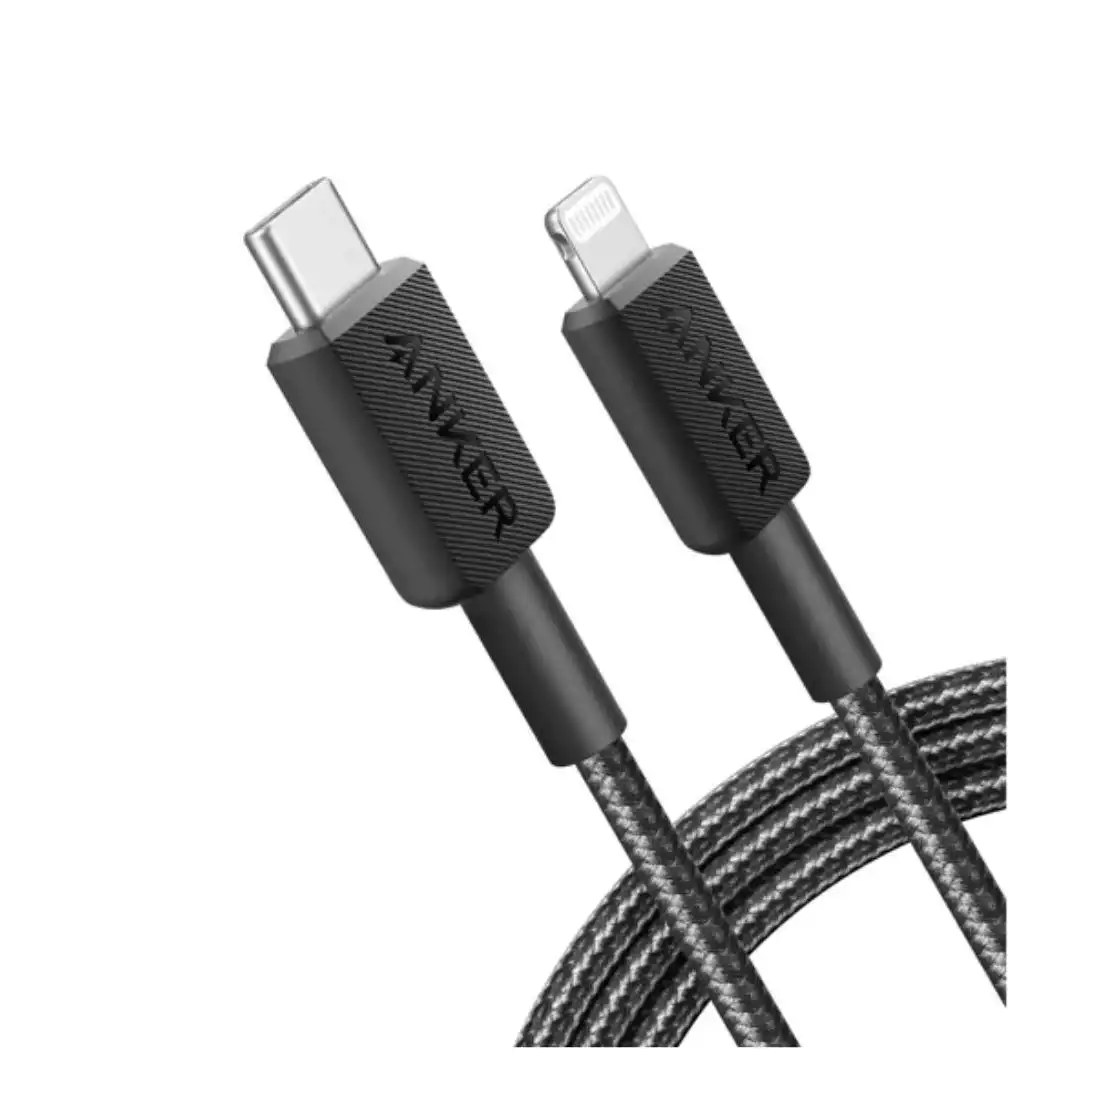 Anker 322 USB-C to Lightning Cable (1.8m Braided) - Black